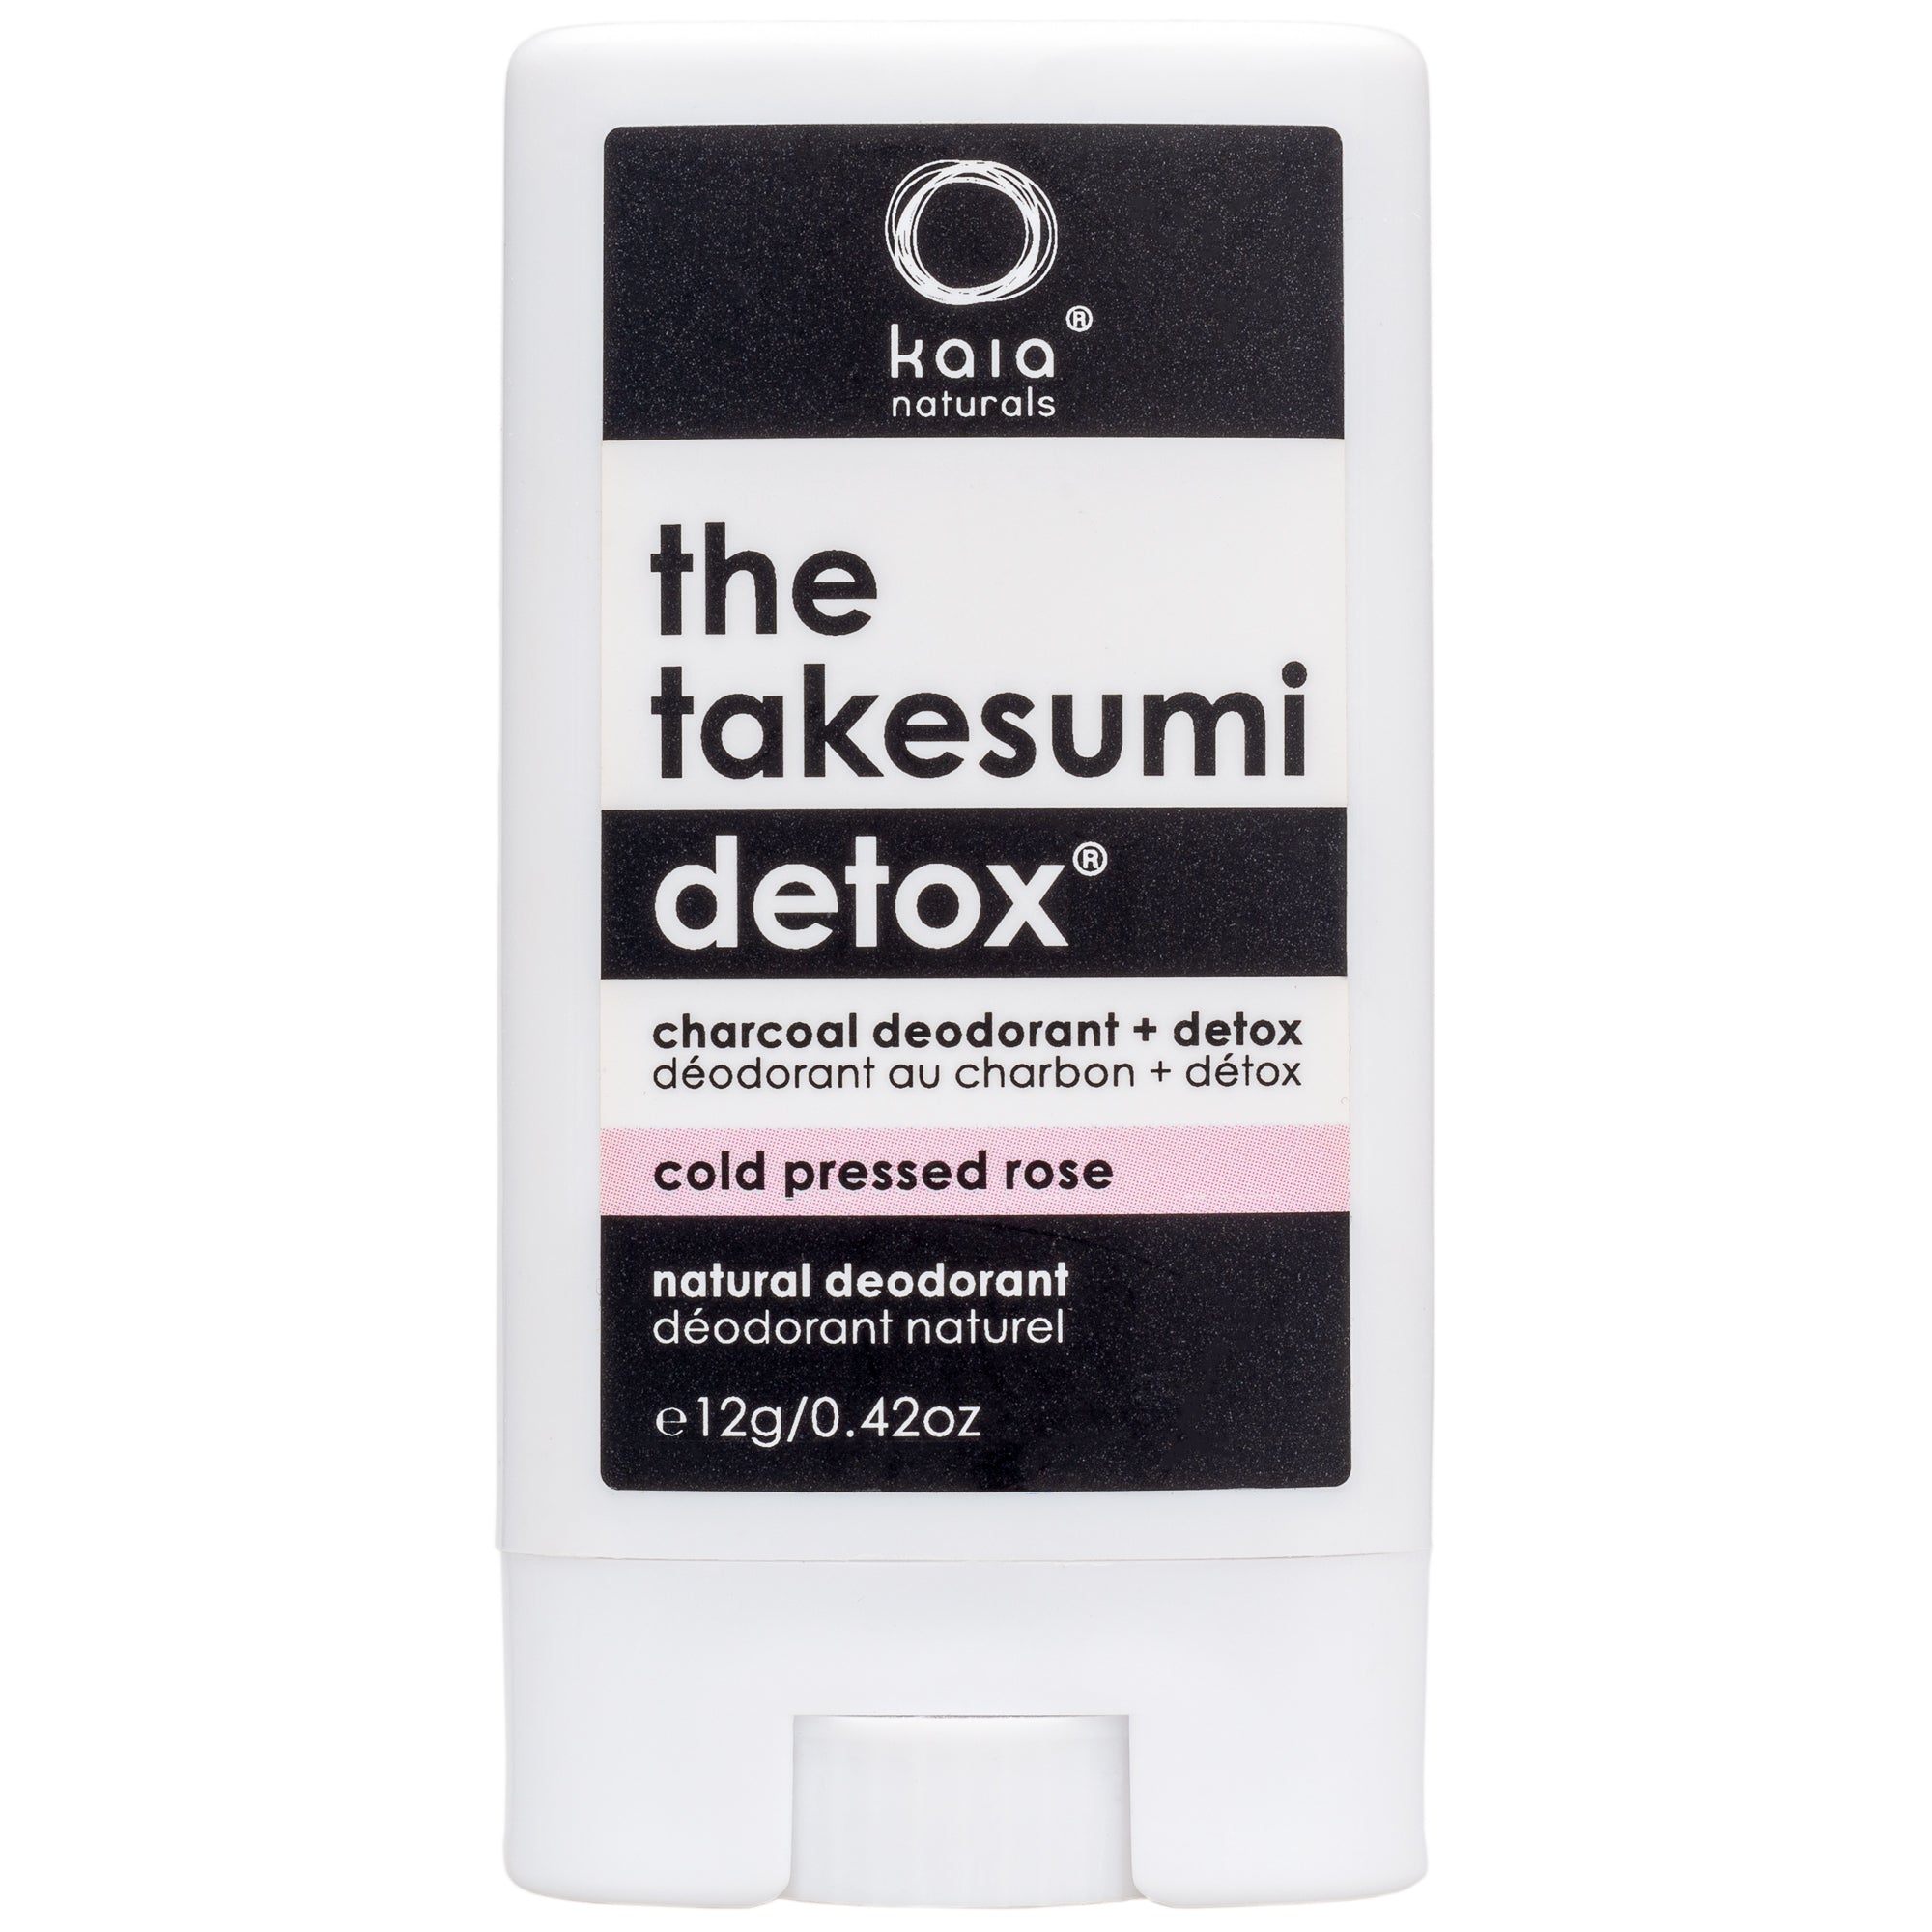 The Takesumi Detox Charcoal Deodorant and Detox Cold Pressed Rose - Travel